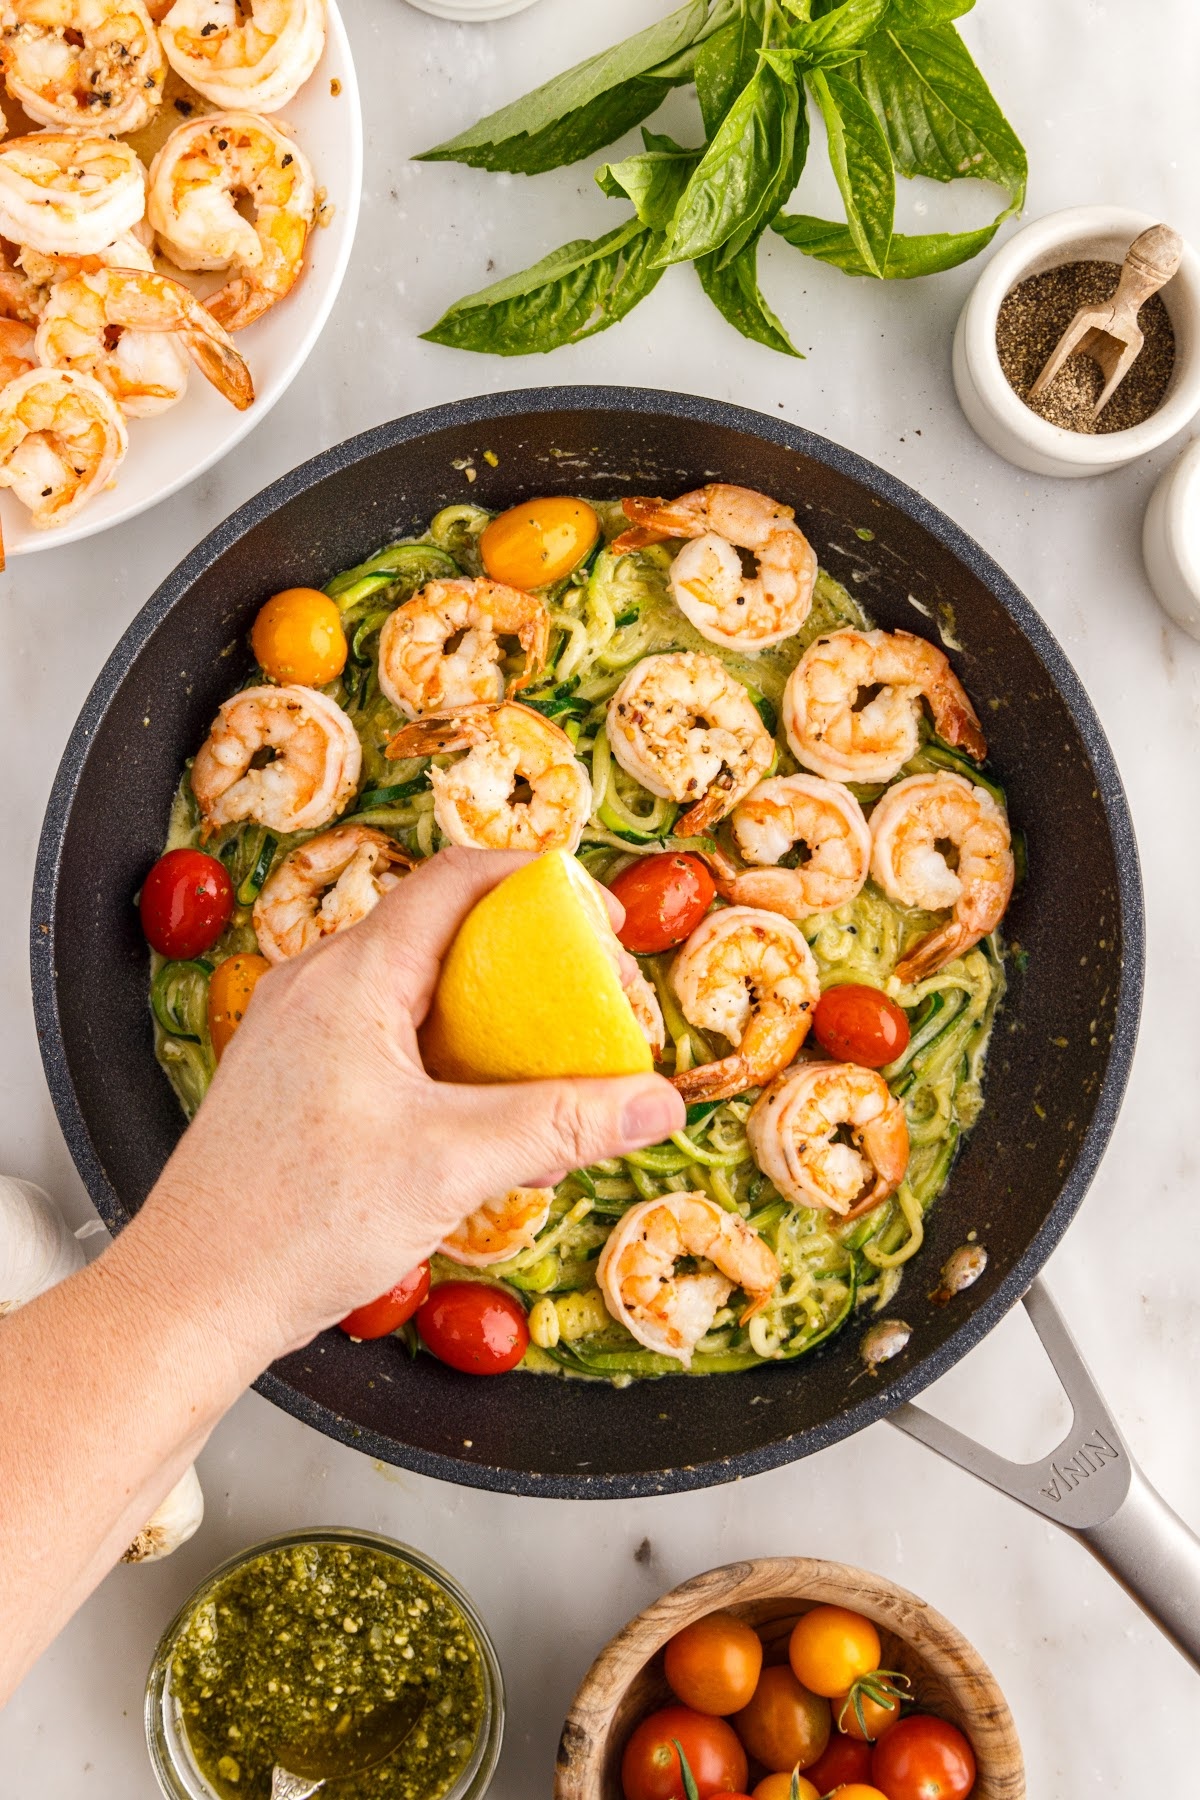 Lemon squeezed on Pesto Zucchini Noodles with Shrimp in a skillet.